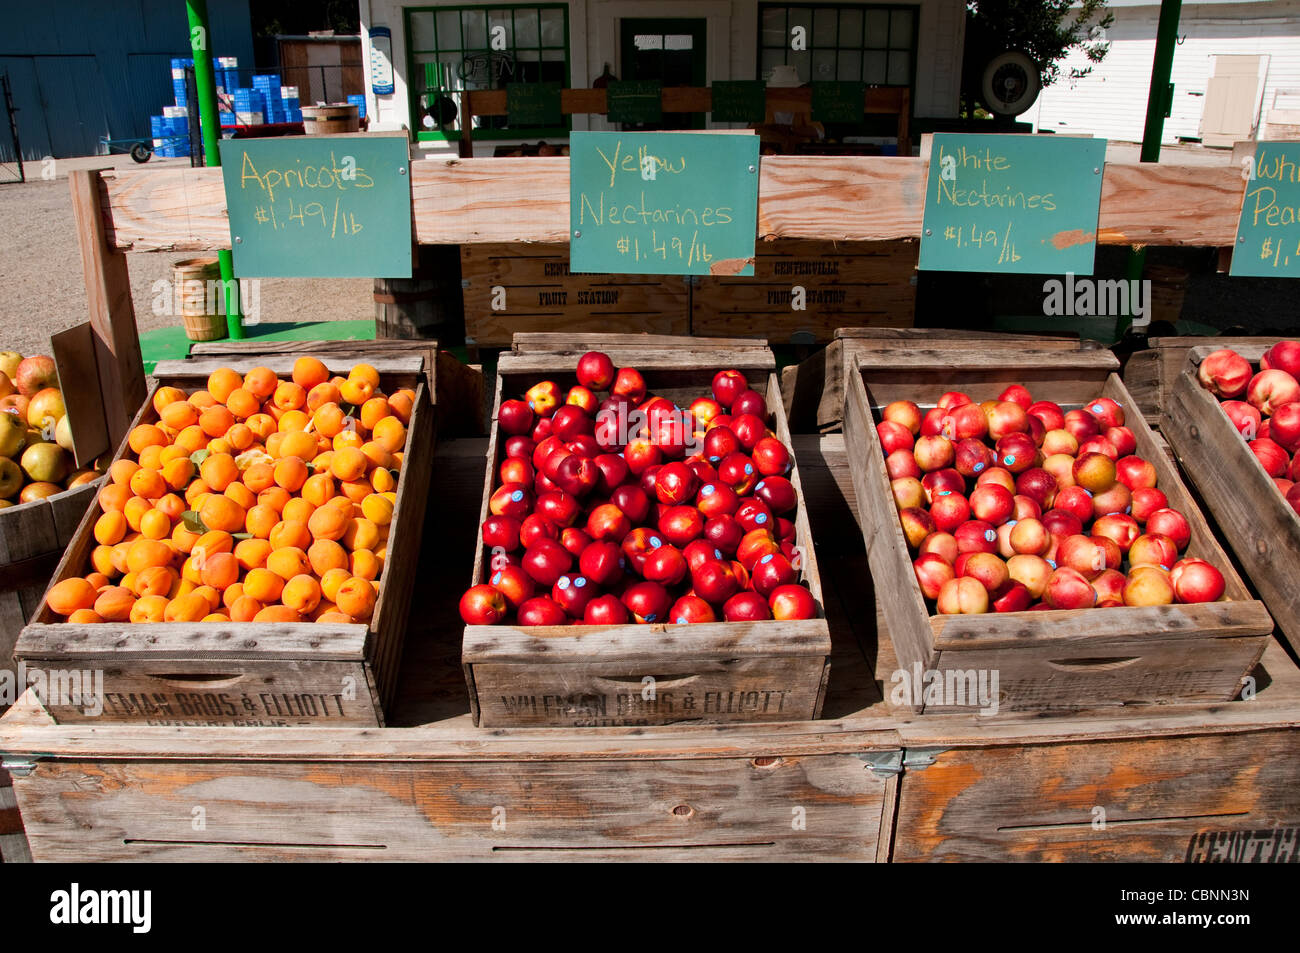 Roadside fruit stand near Fresno in Centreville California on road to Stock Photo - Alamy